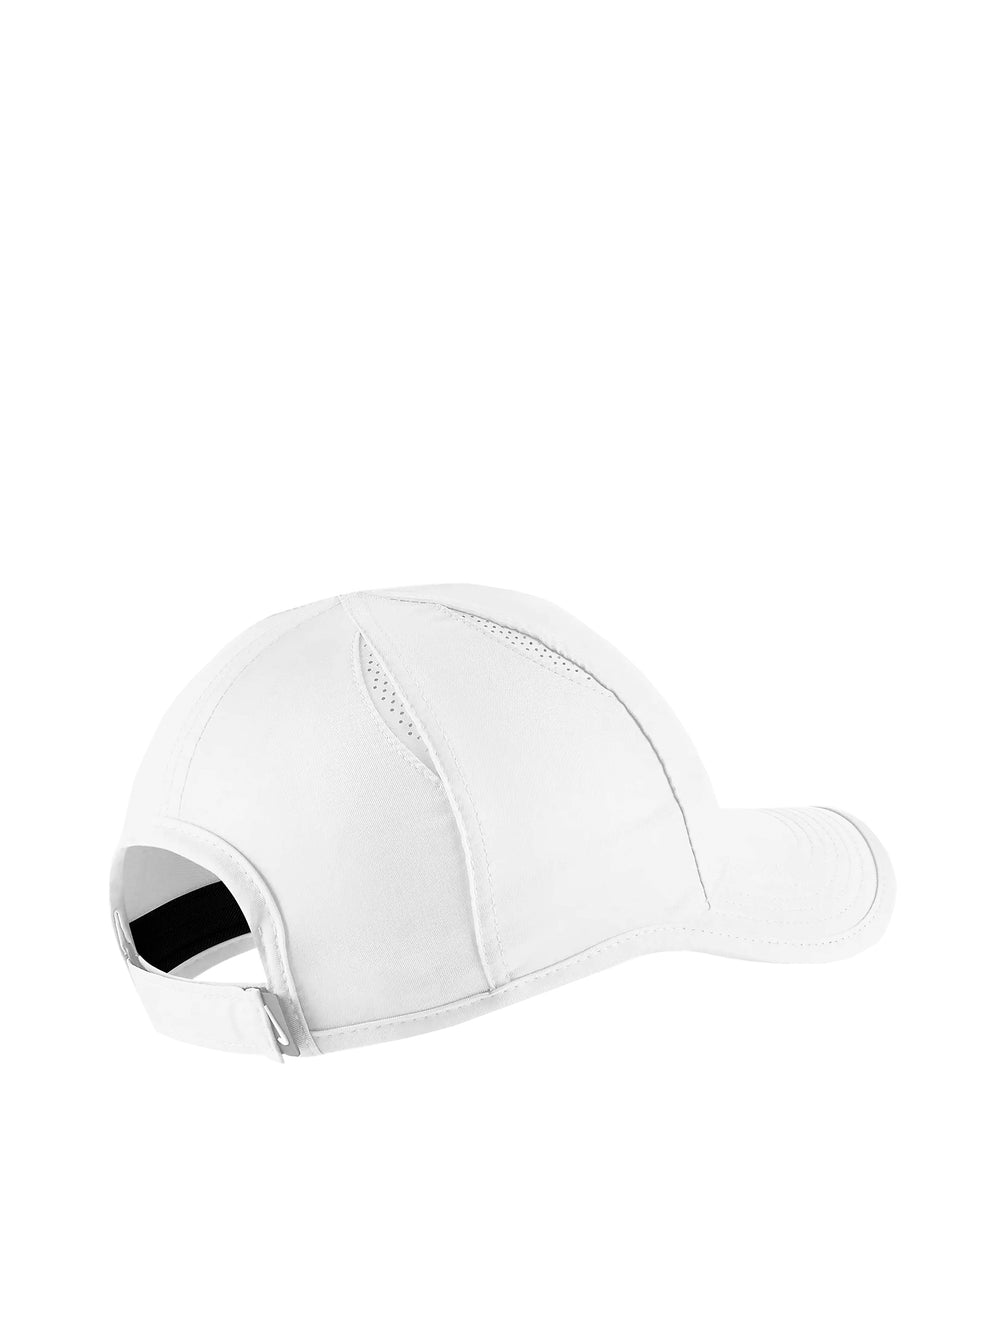 NIKE FEATHERLIGHT CAP - WHITE - CLEARANCE